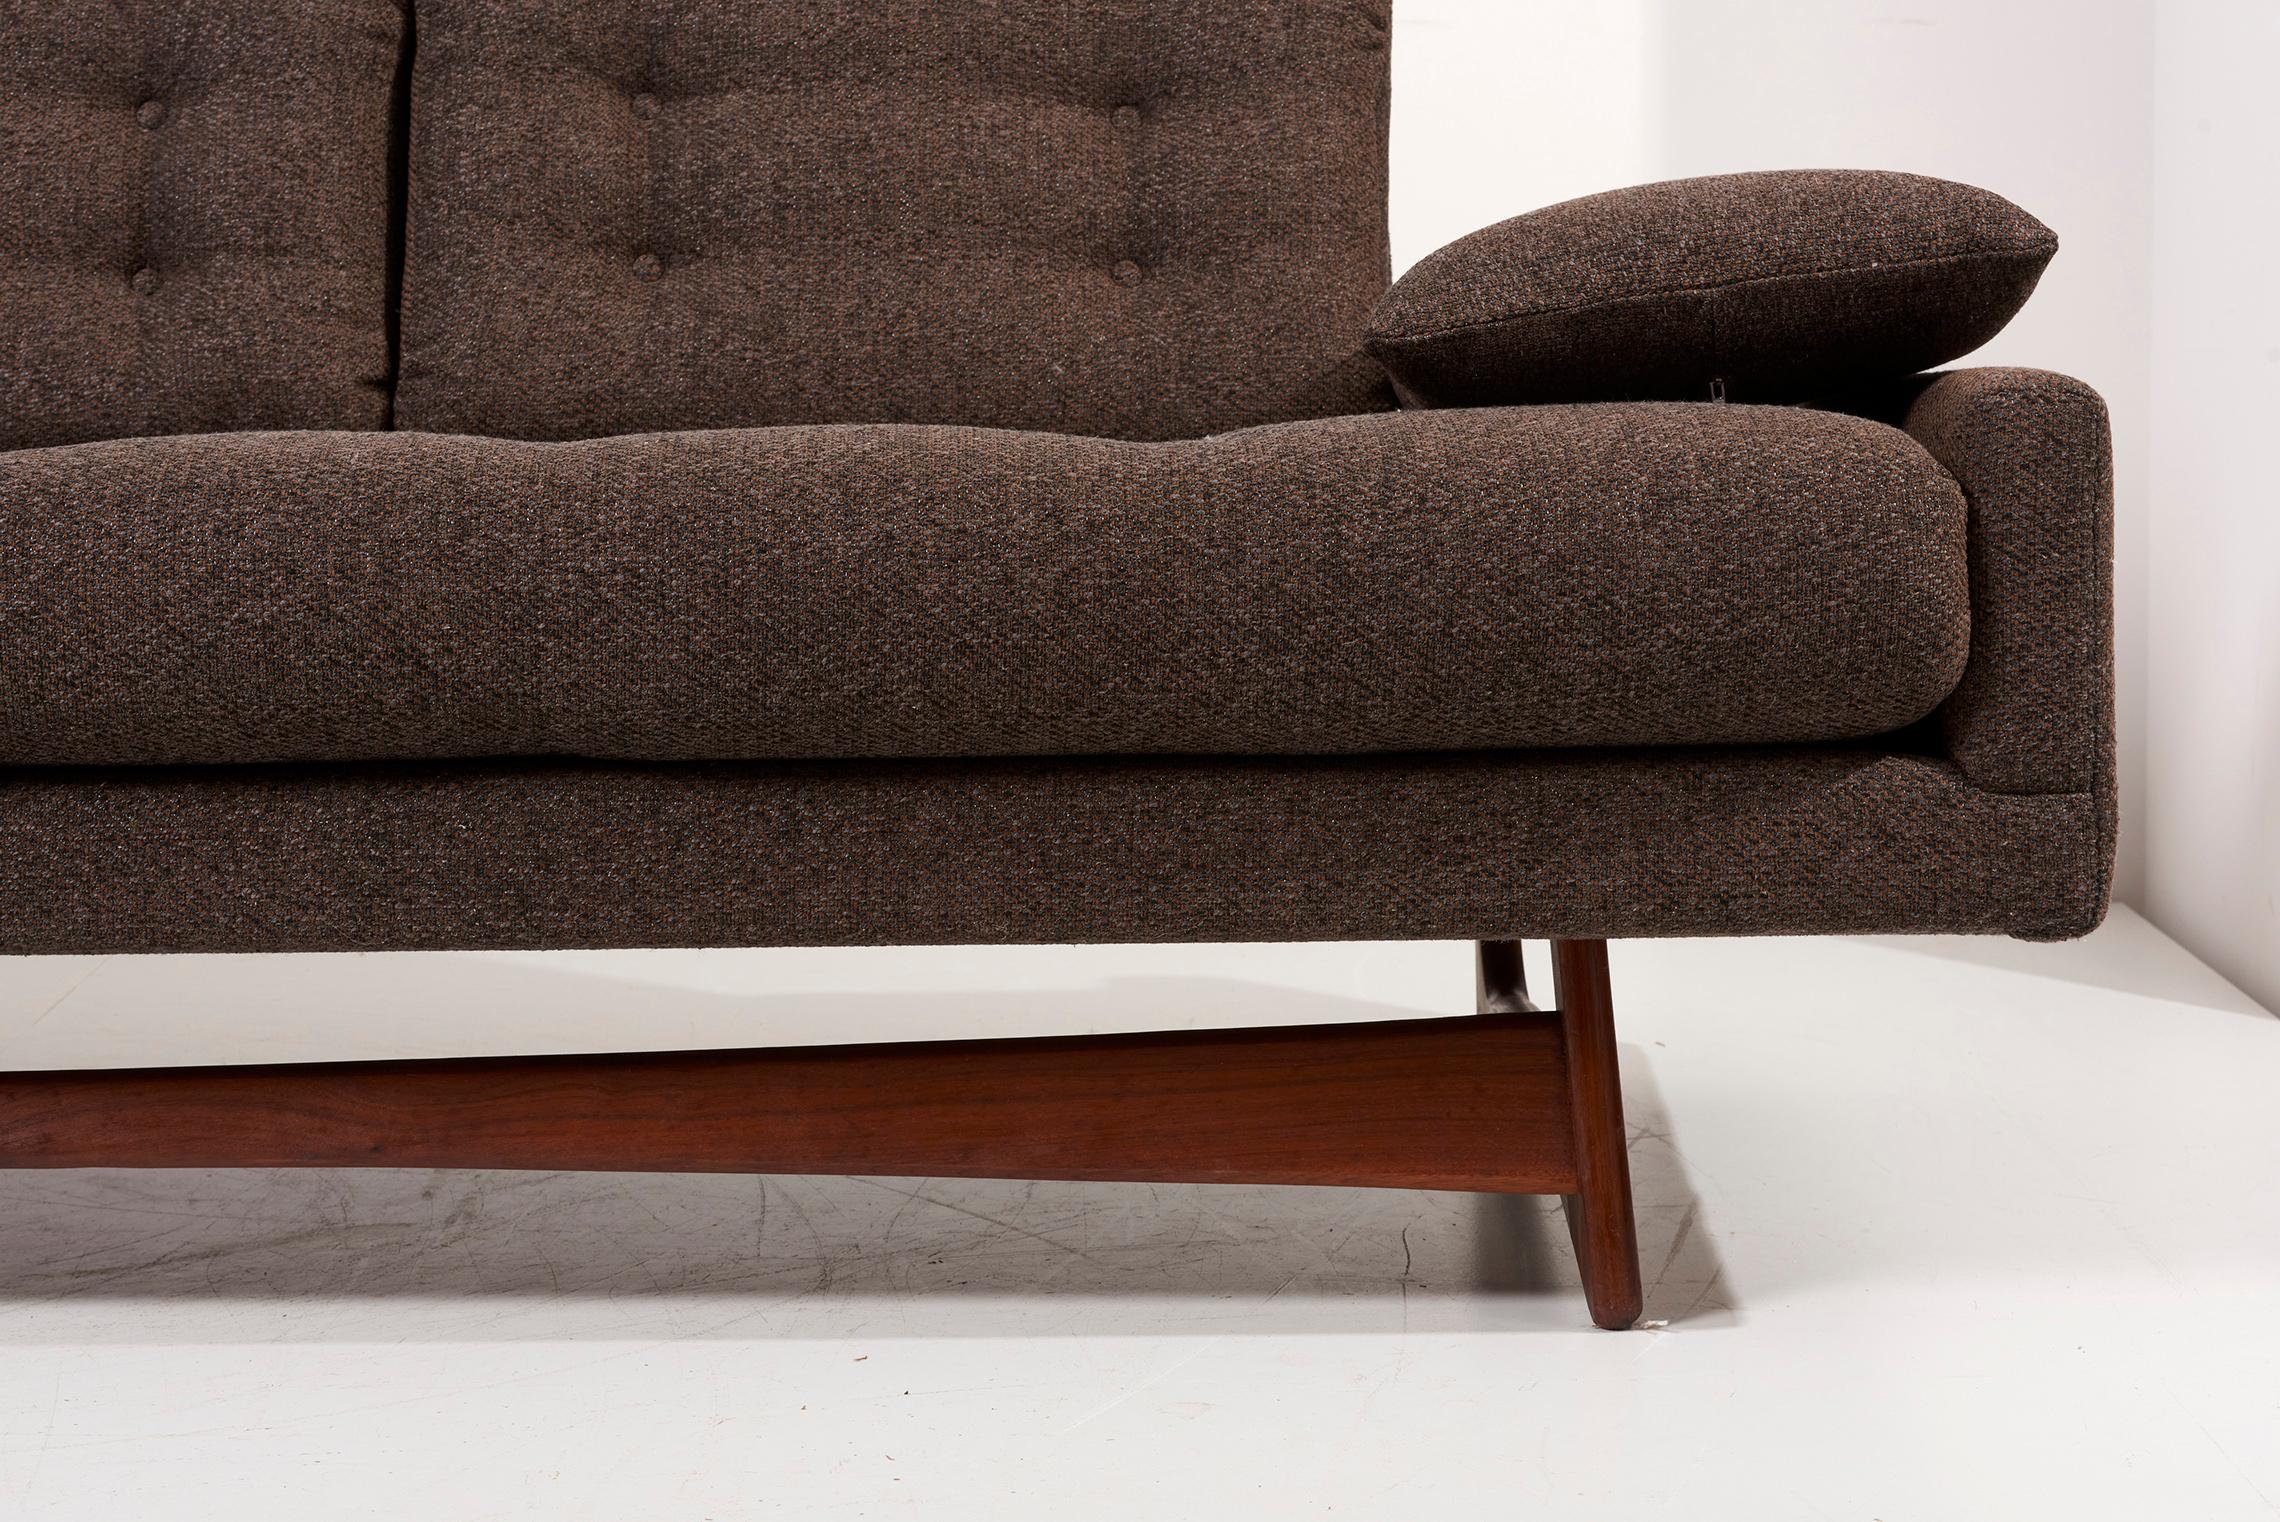 Adrian Pearsall 'Gondola Sofa' in Brown Fabric for Craft Associates, USA, 1950s For Sale 2